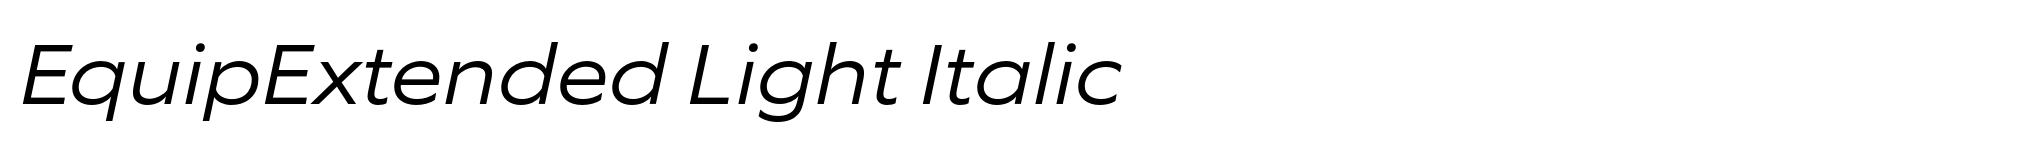 EquipExtended Light Italic image